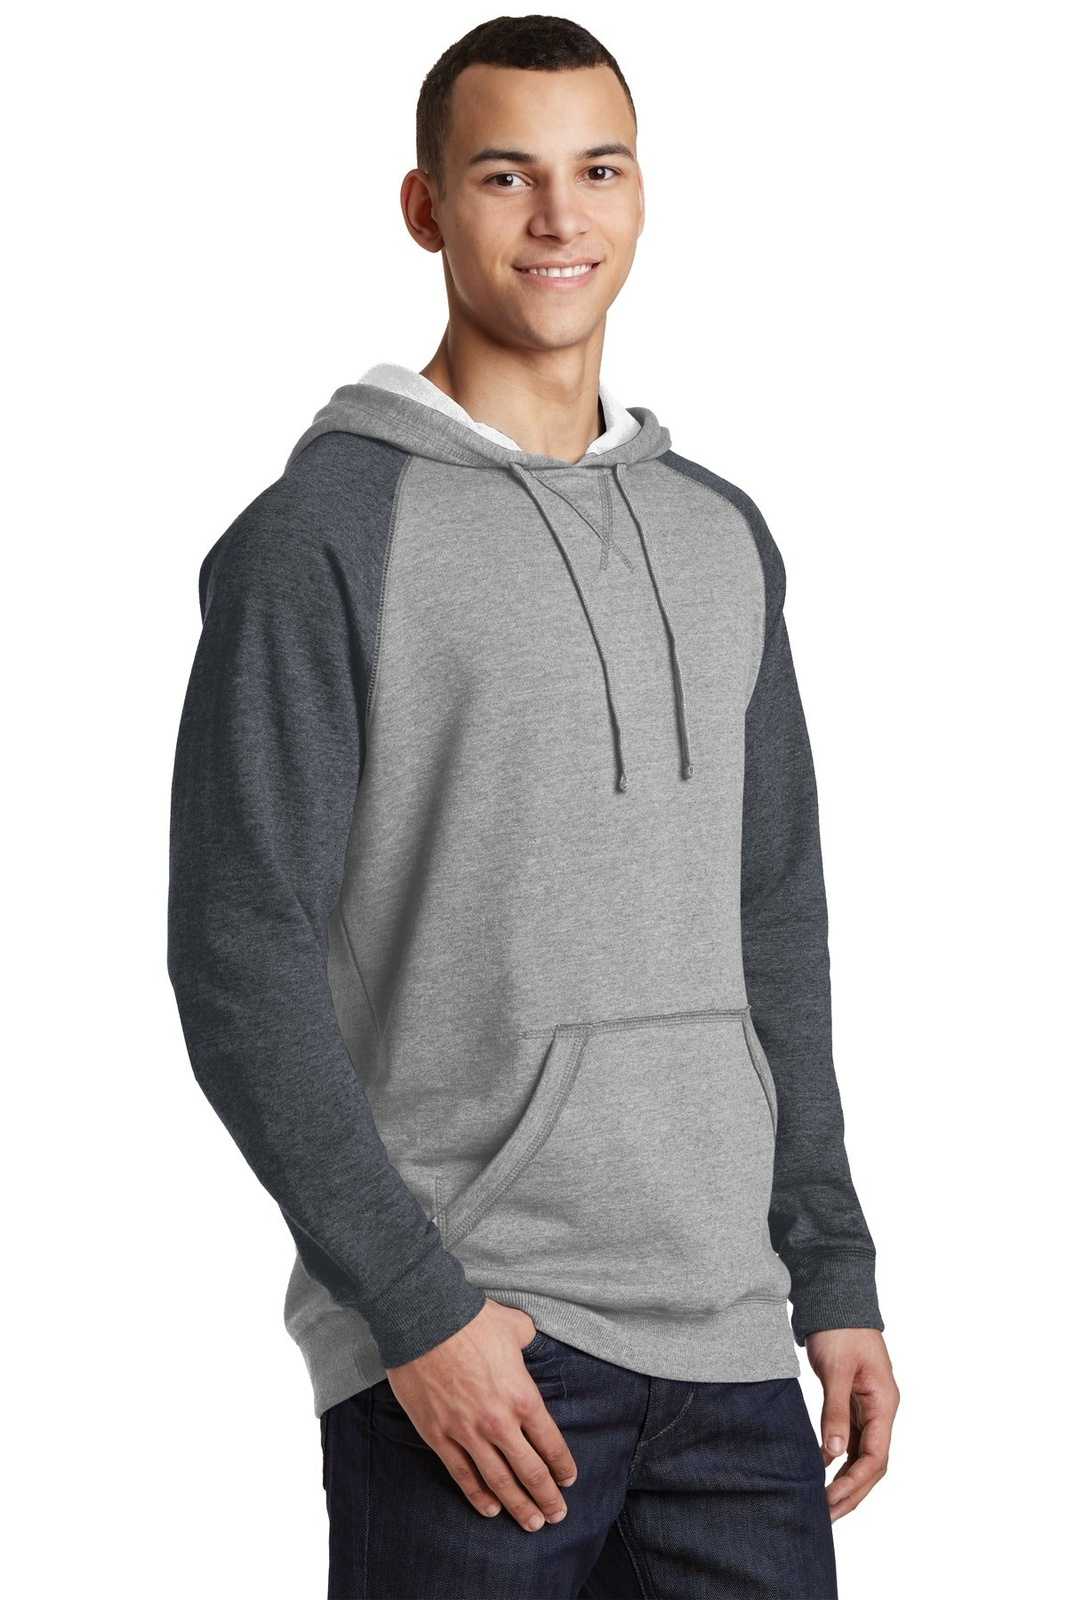 District DT196 Young Mens Lightweight Fleece Raglan Hoodie - Heathered Gray Heathered Charcoal - HIT a Double - 4